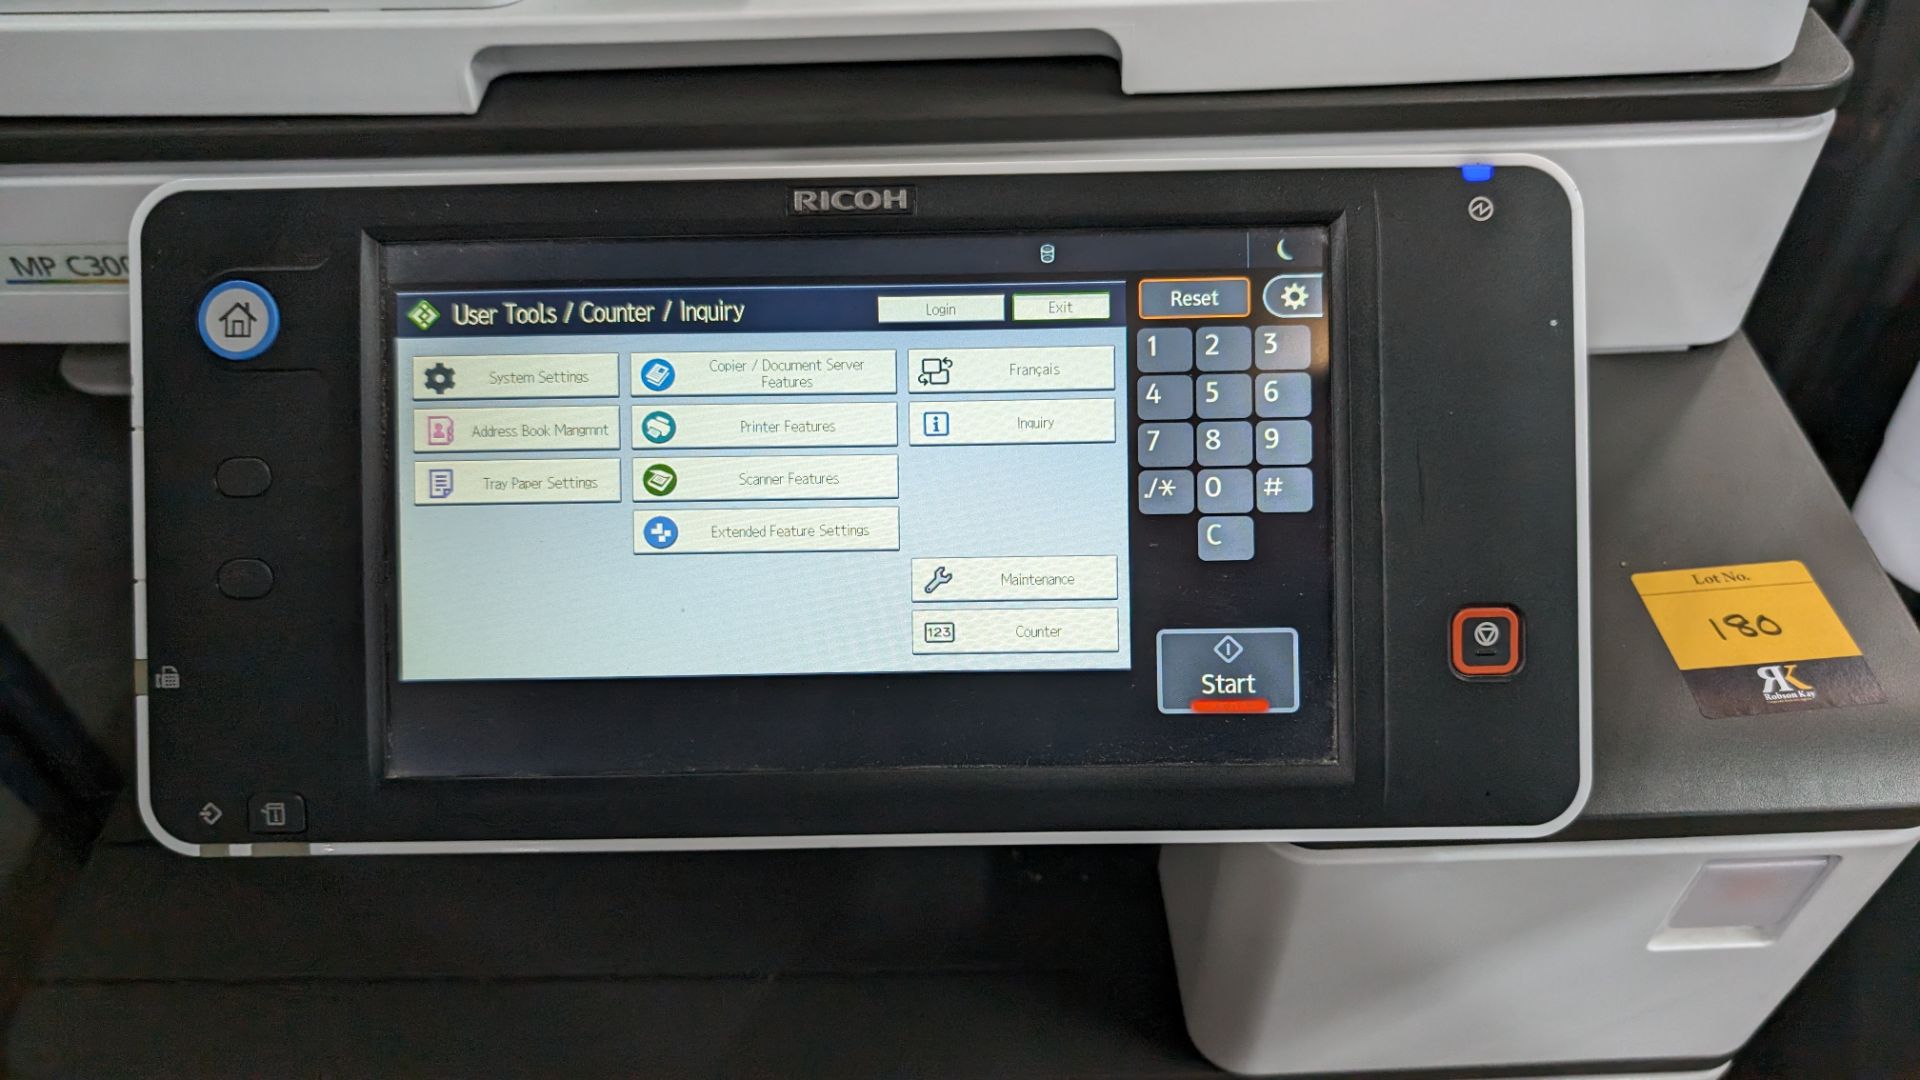 Ricoh MP C3003 floor standing copier with touchscreen controls, ADF, twin paper cassettes & more - Image 6 of 18